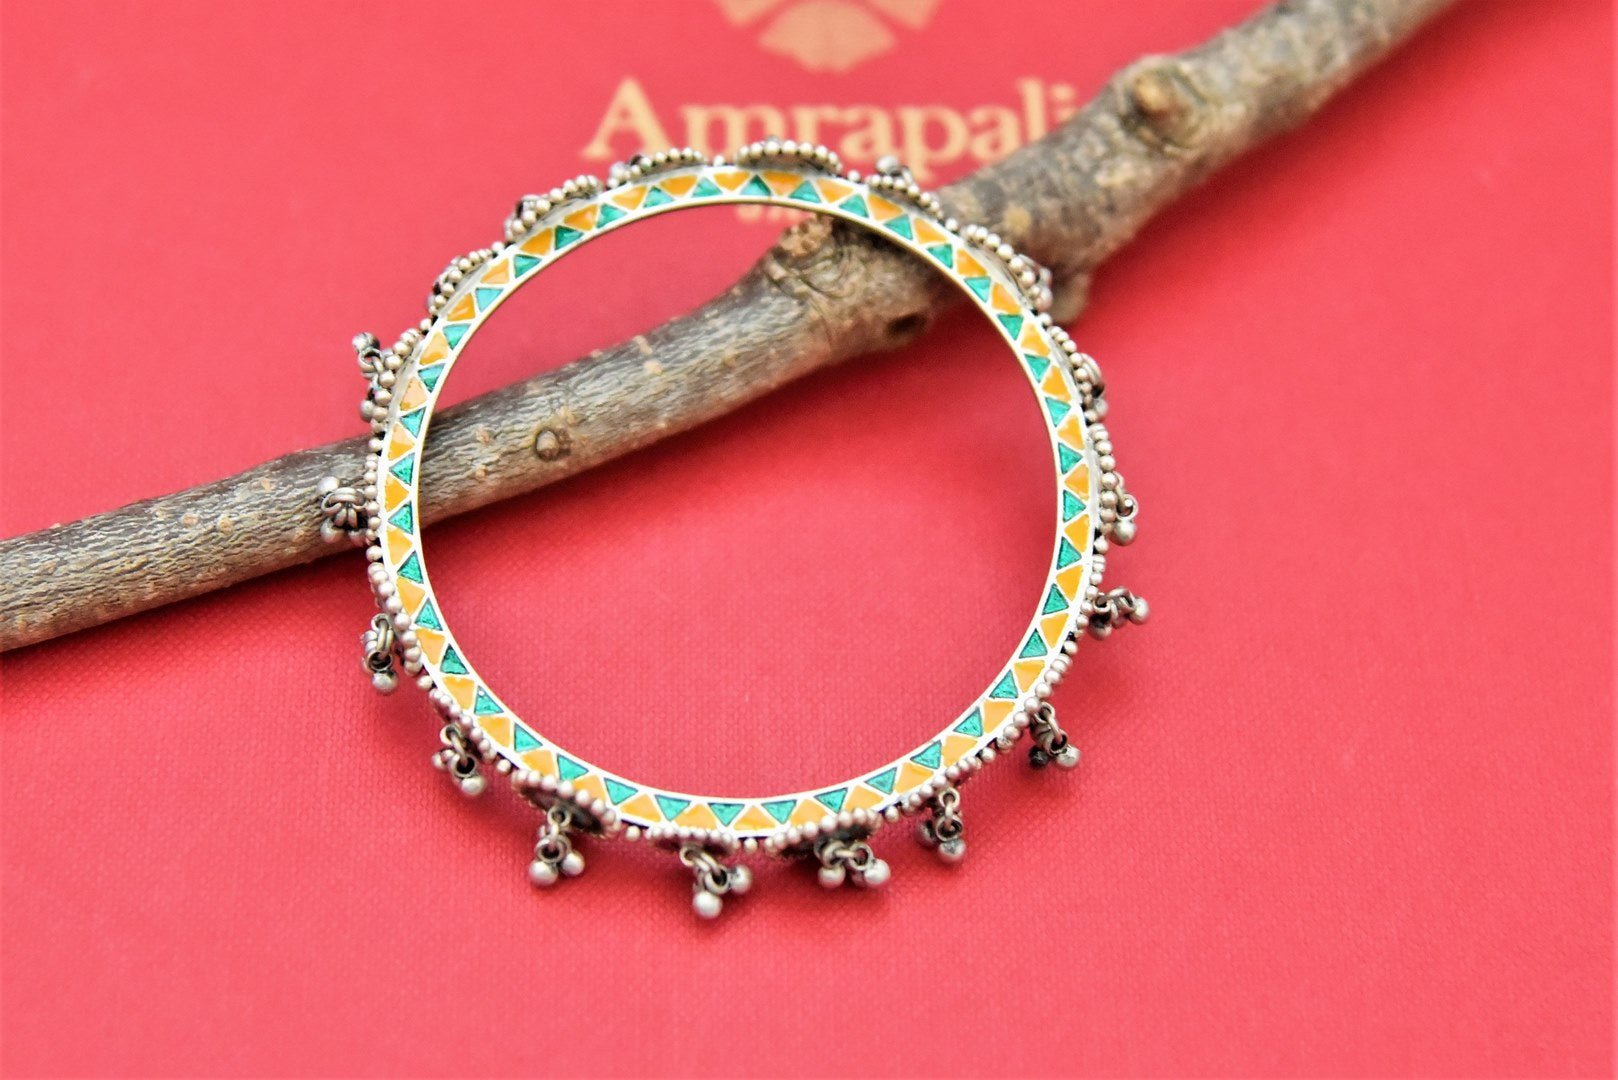 Buy Amrapali stunning enamel work and silver ghungroo bangle online in USA. Shop beautiful Amrapali jewelry, gold plated necklaces, silver jewelry, wedding jewelry, gold plated earrings from Pure Elegance Indian fashion store in USA.-front